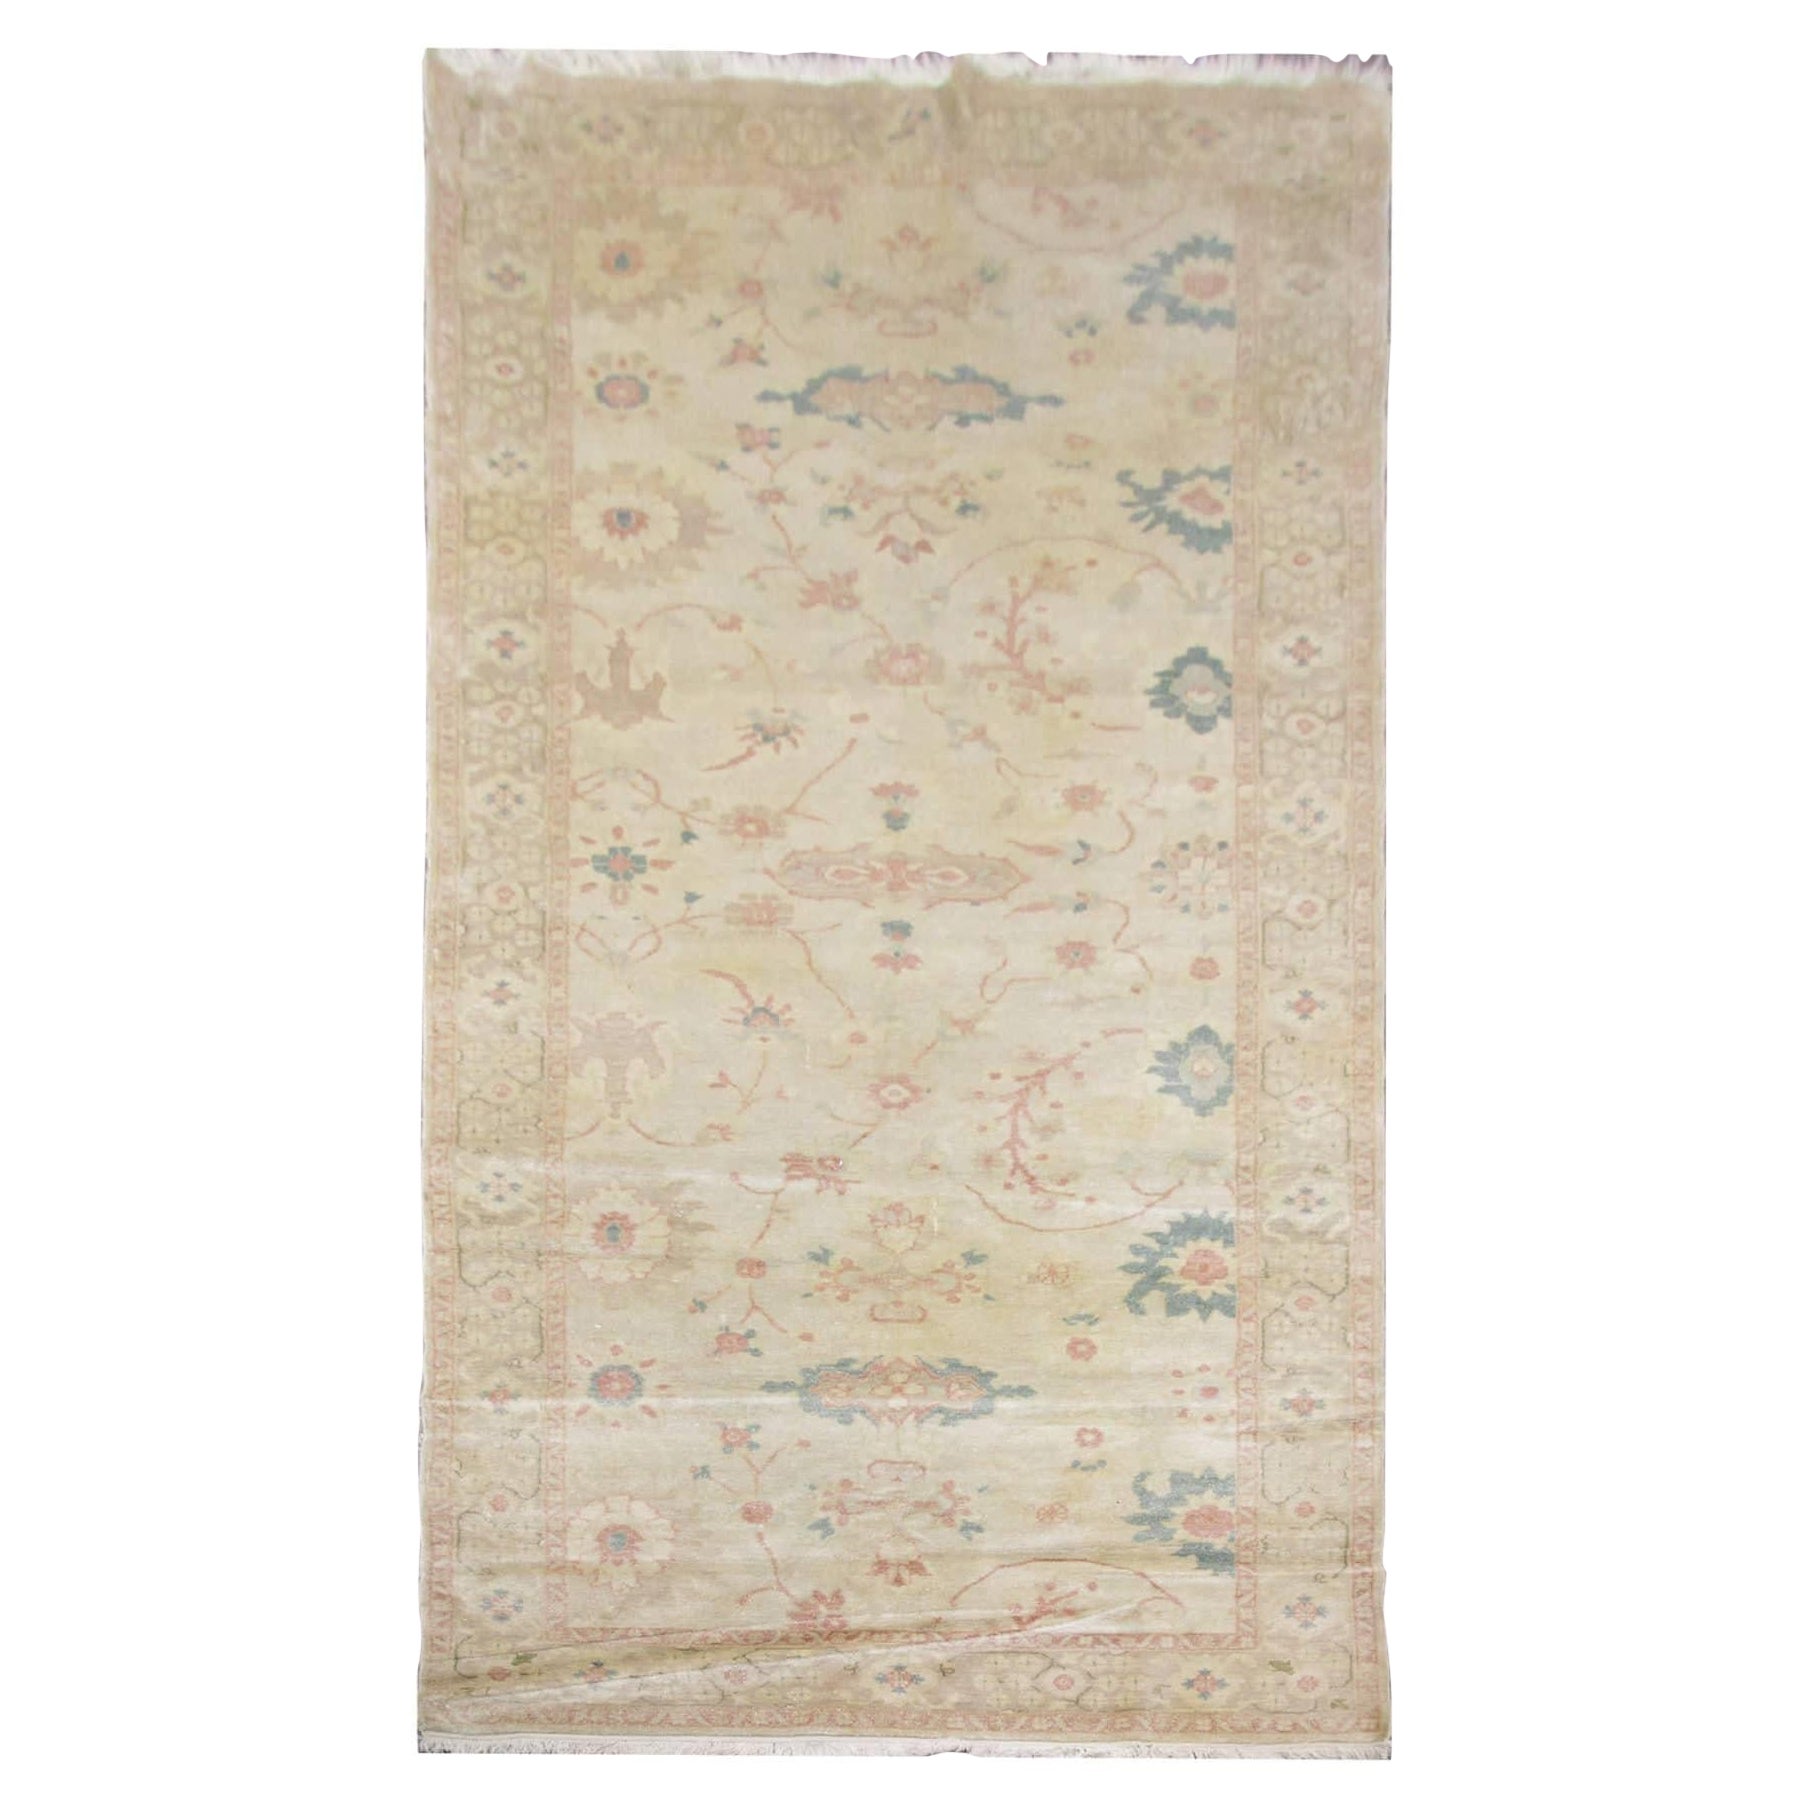 High Quality Egeption Ziegler Carpet Handmade Tribal Rustic Wool Rug for Sale